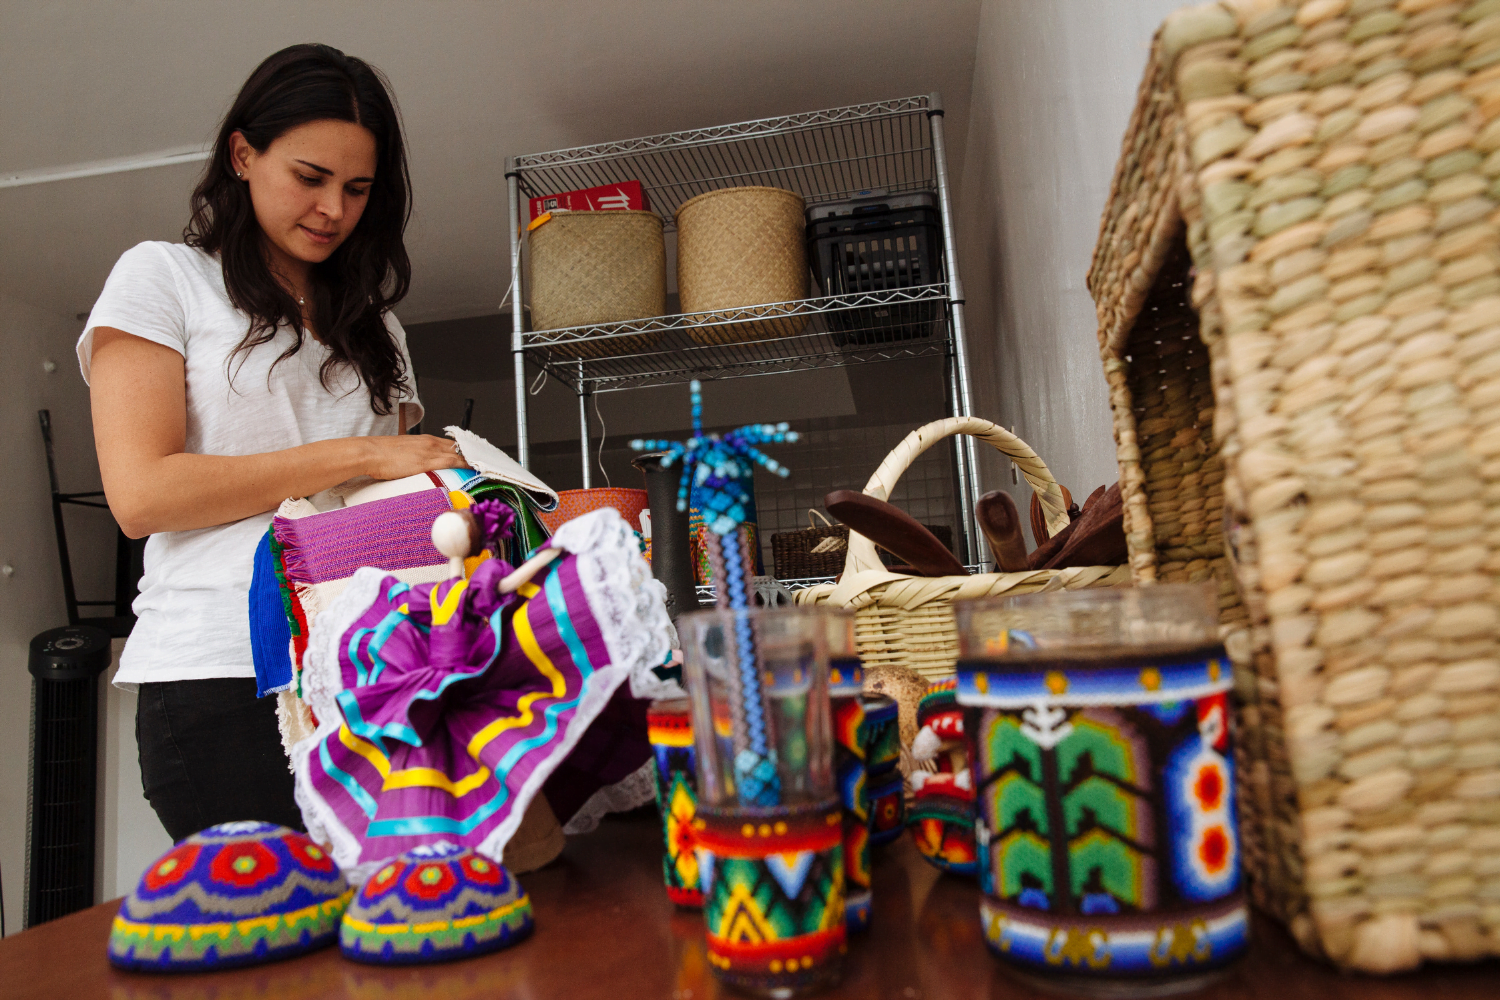 Sofia Cruz del Río Castellanos, a woman entrepreneur from Mexico works with hand beaded products. In the forefront are glass jars with intricately beaded covers. She stands in the background wearing a white t-shirt and working with a fabric that has purple, yellow and blue ribbons on it. In the background are shelves of woven baskets.